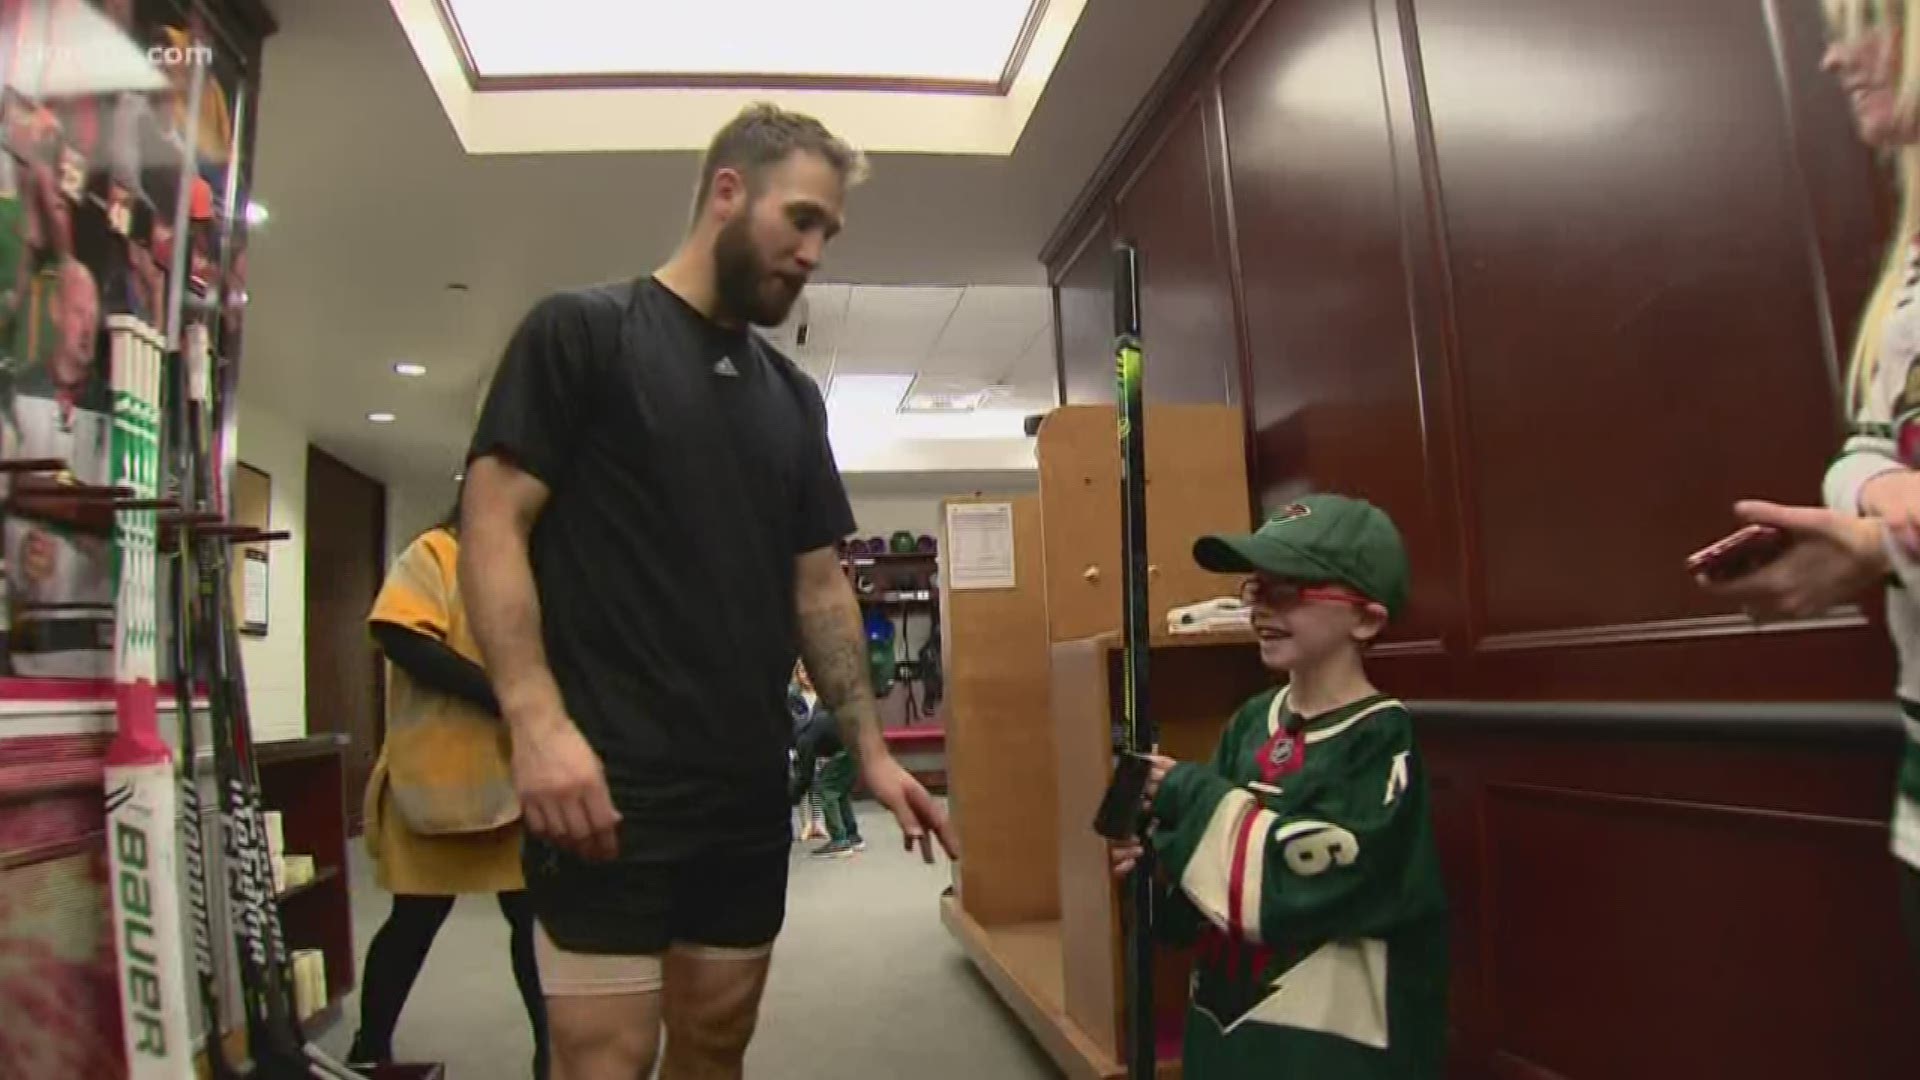 MN Wild' Jason Zucker gave this young boy a birthday to remember.